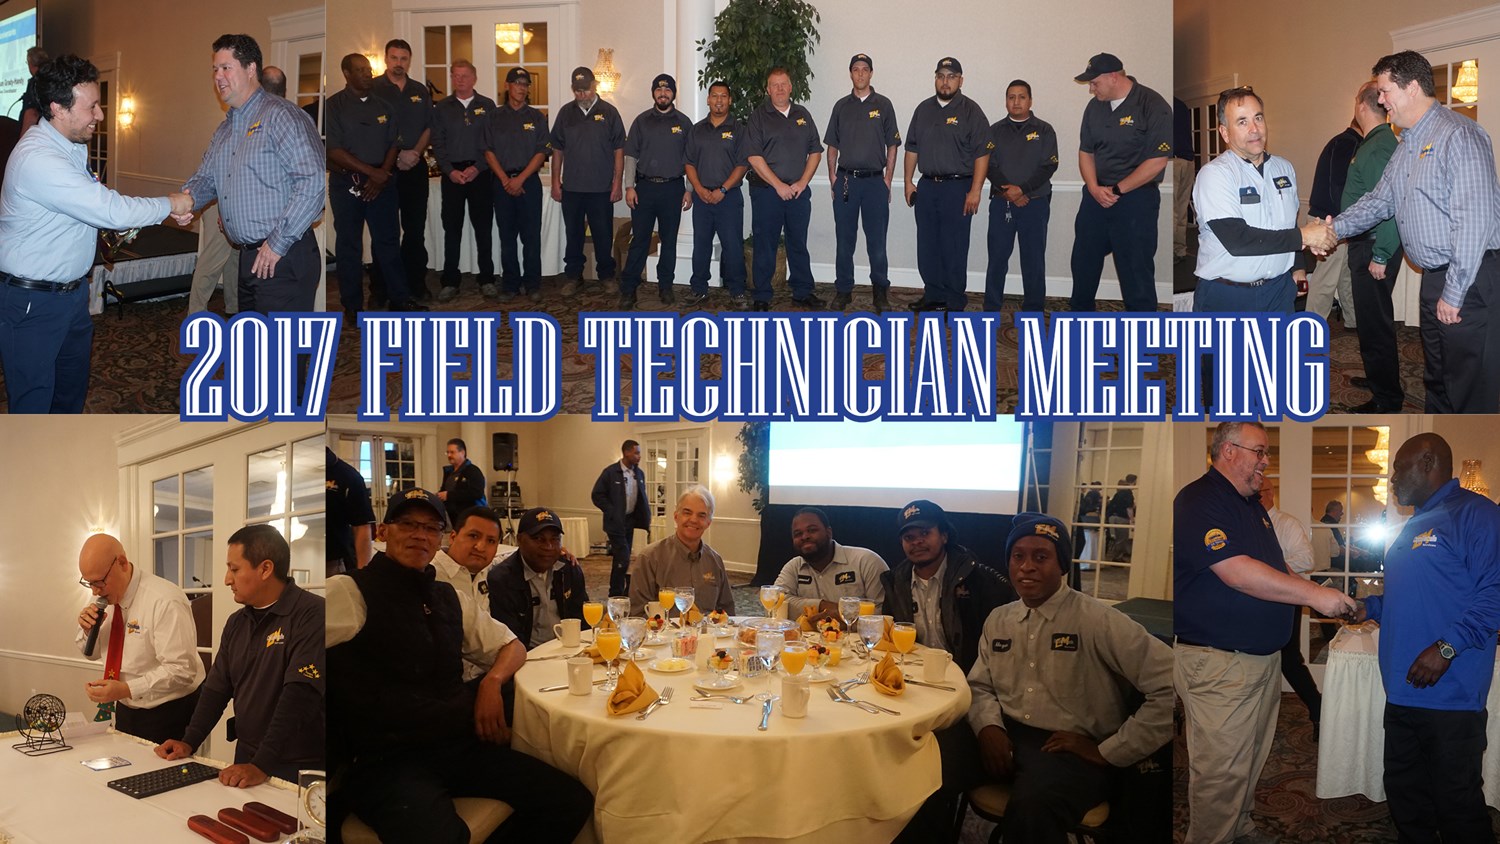 Collage of CroppMetcalfe employees at the 2017 Field Technician Meeting. 